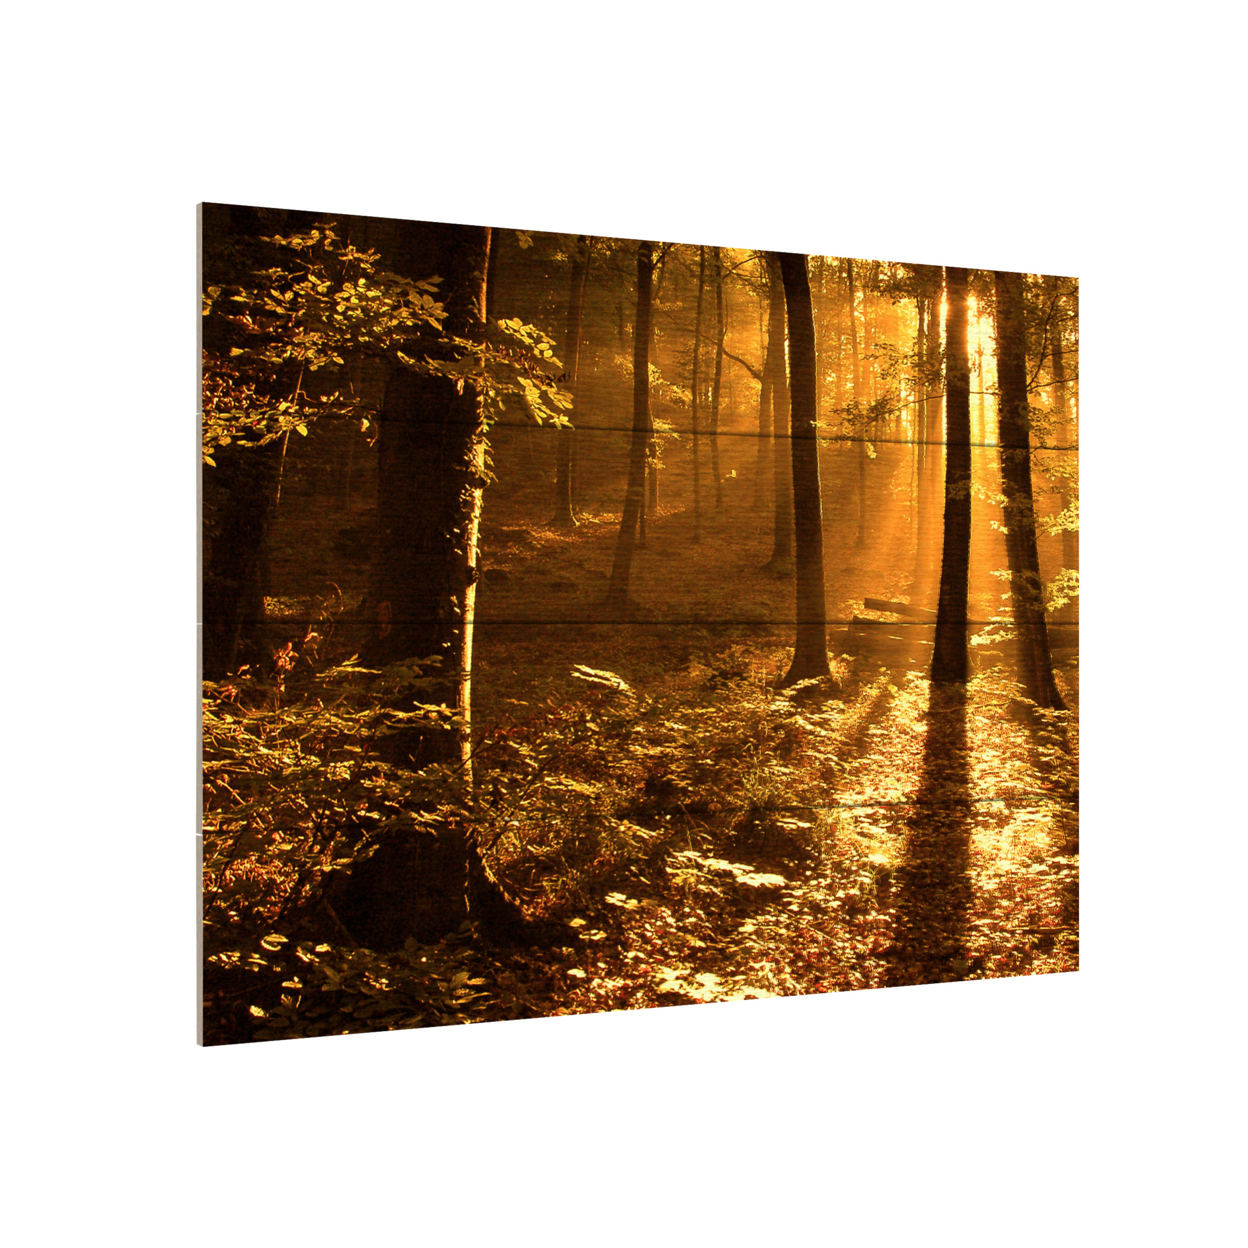 Wall Art 12 X 16 Inches Titled Morning Light Ready To Hang Printed On Wooden Planks